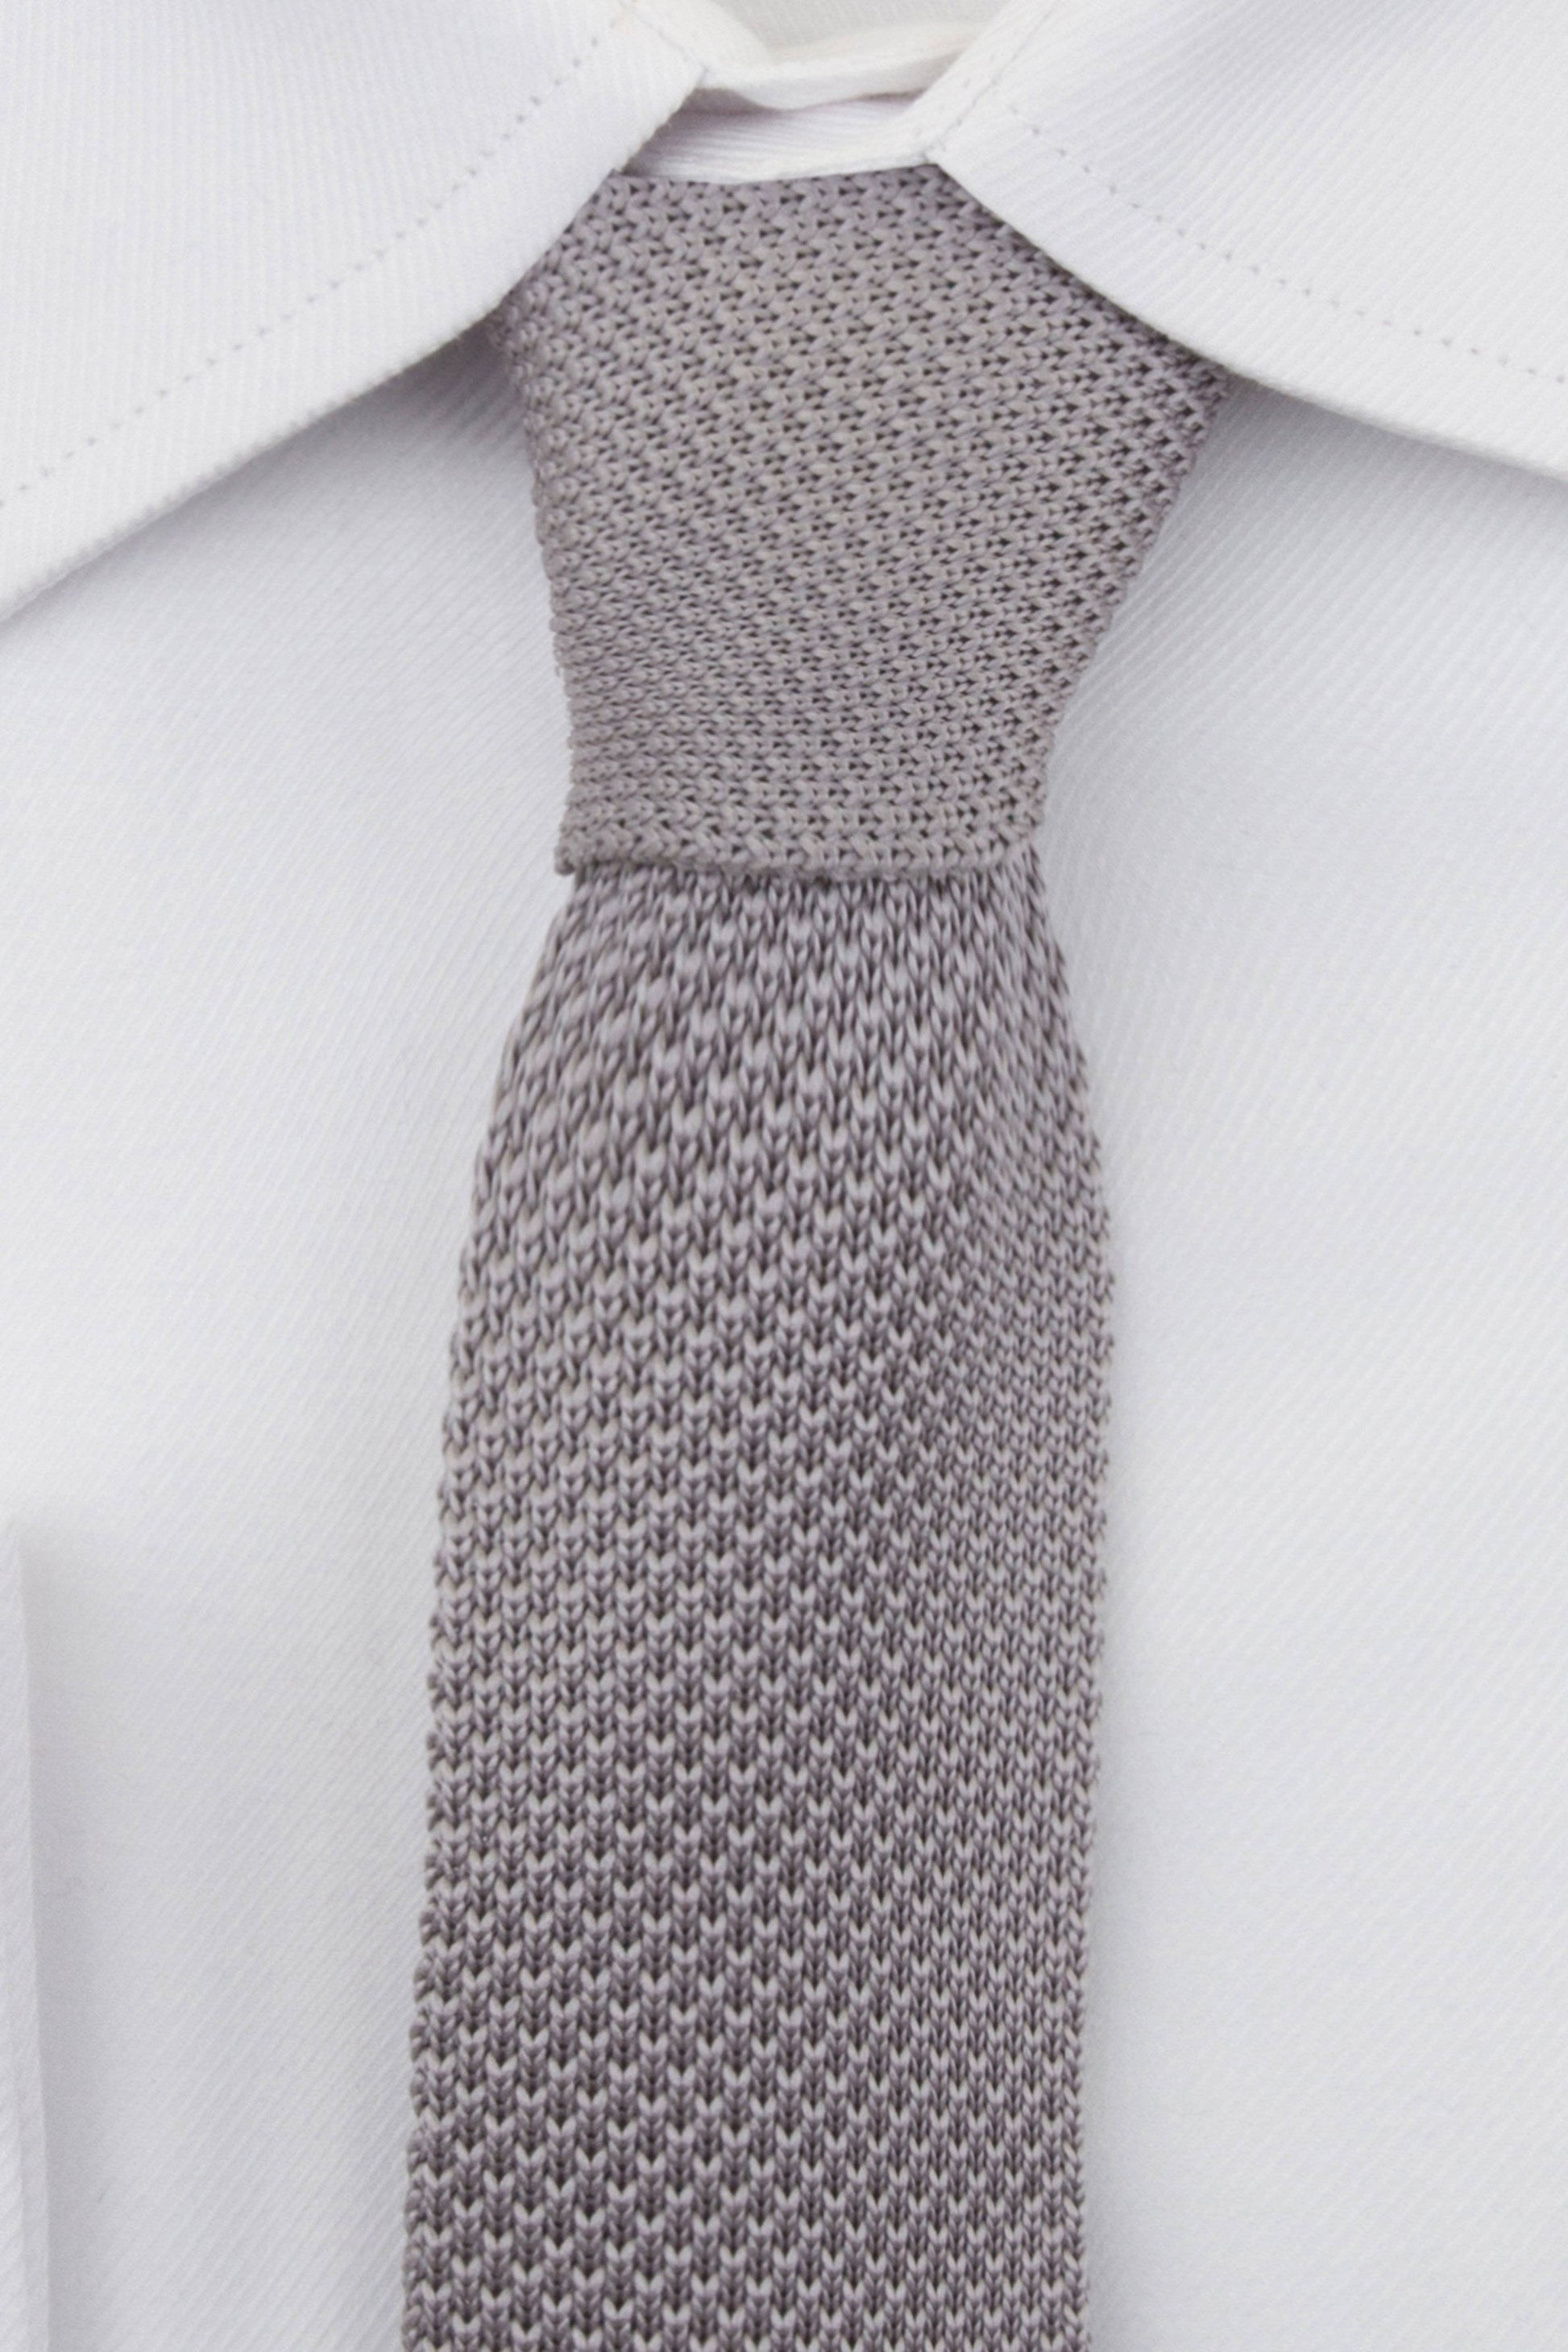 Close up on Silver Knitted Tie  on a shirt